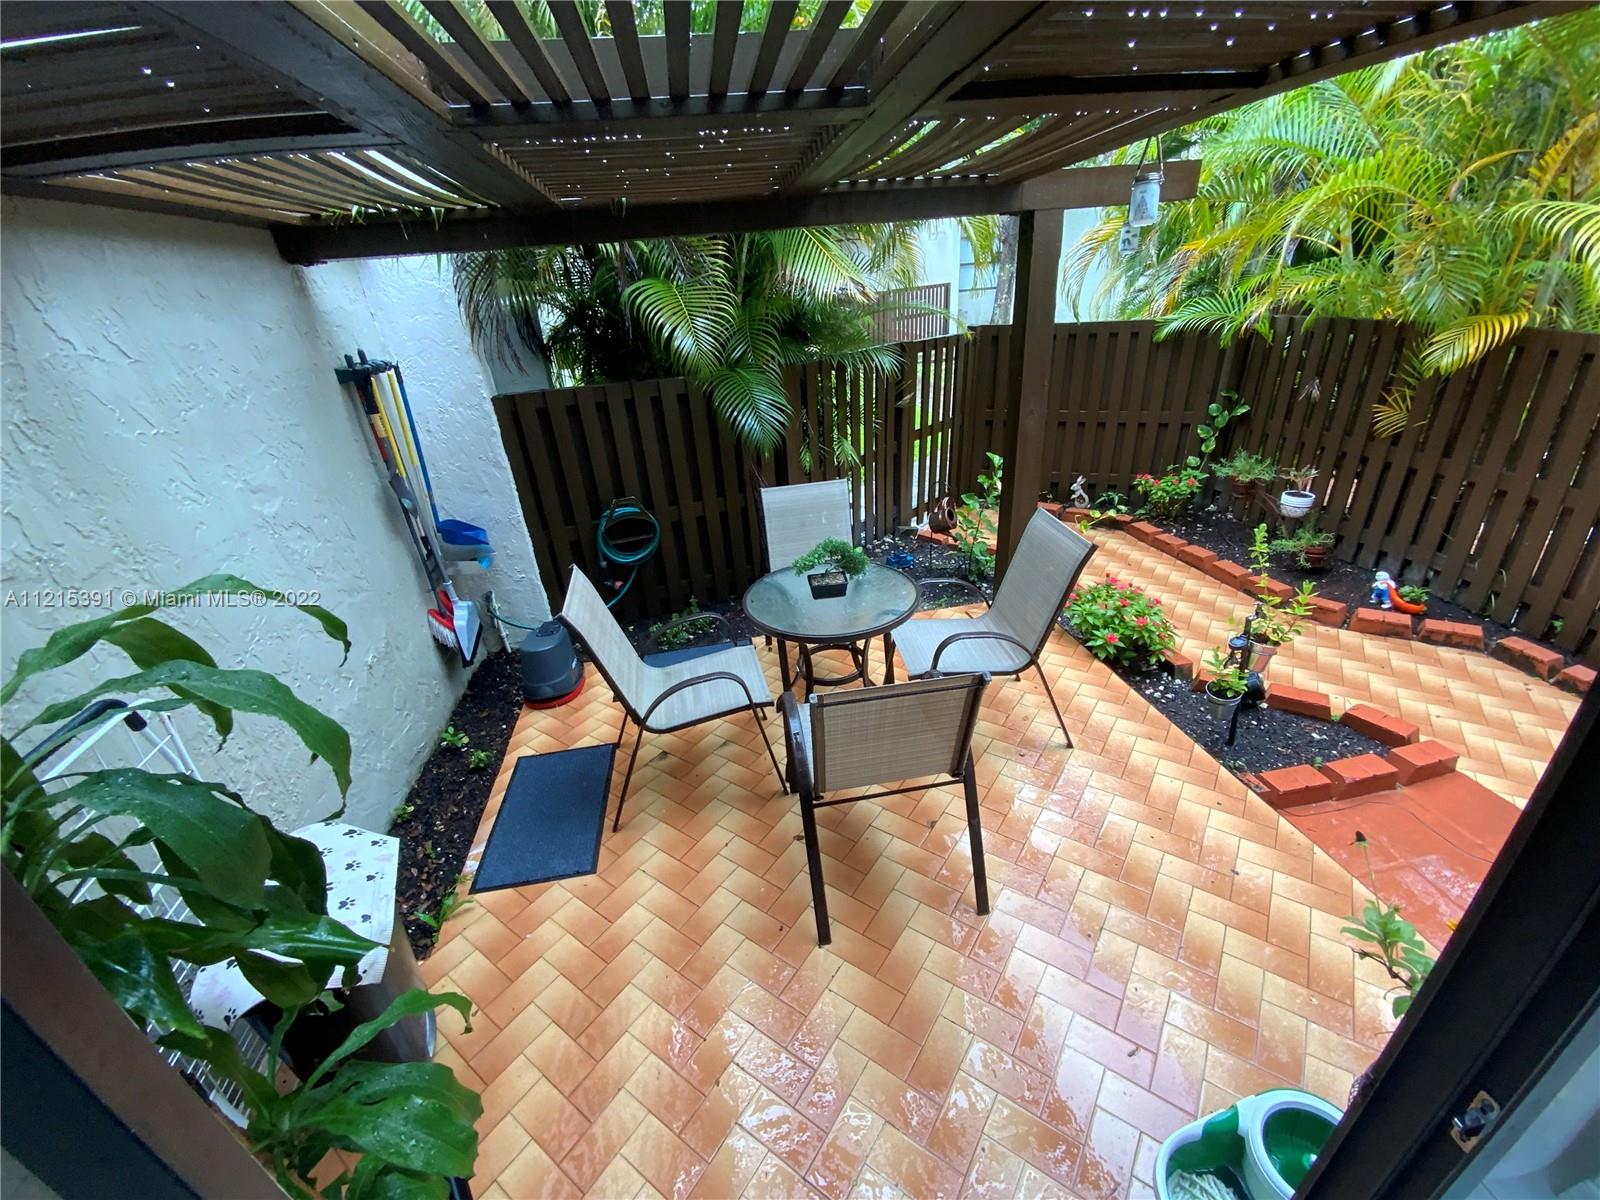 a view of yard with patio